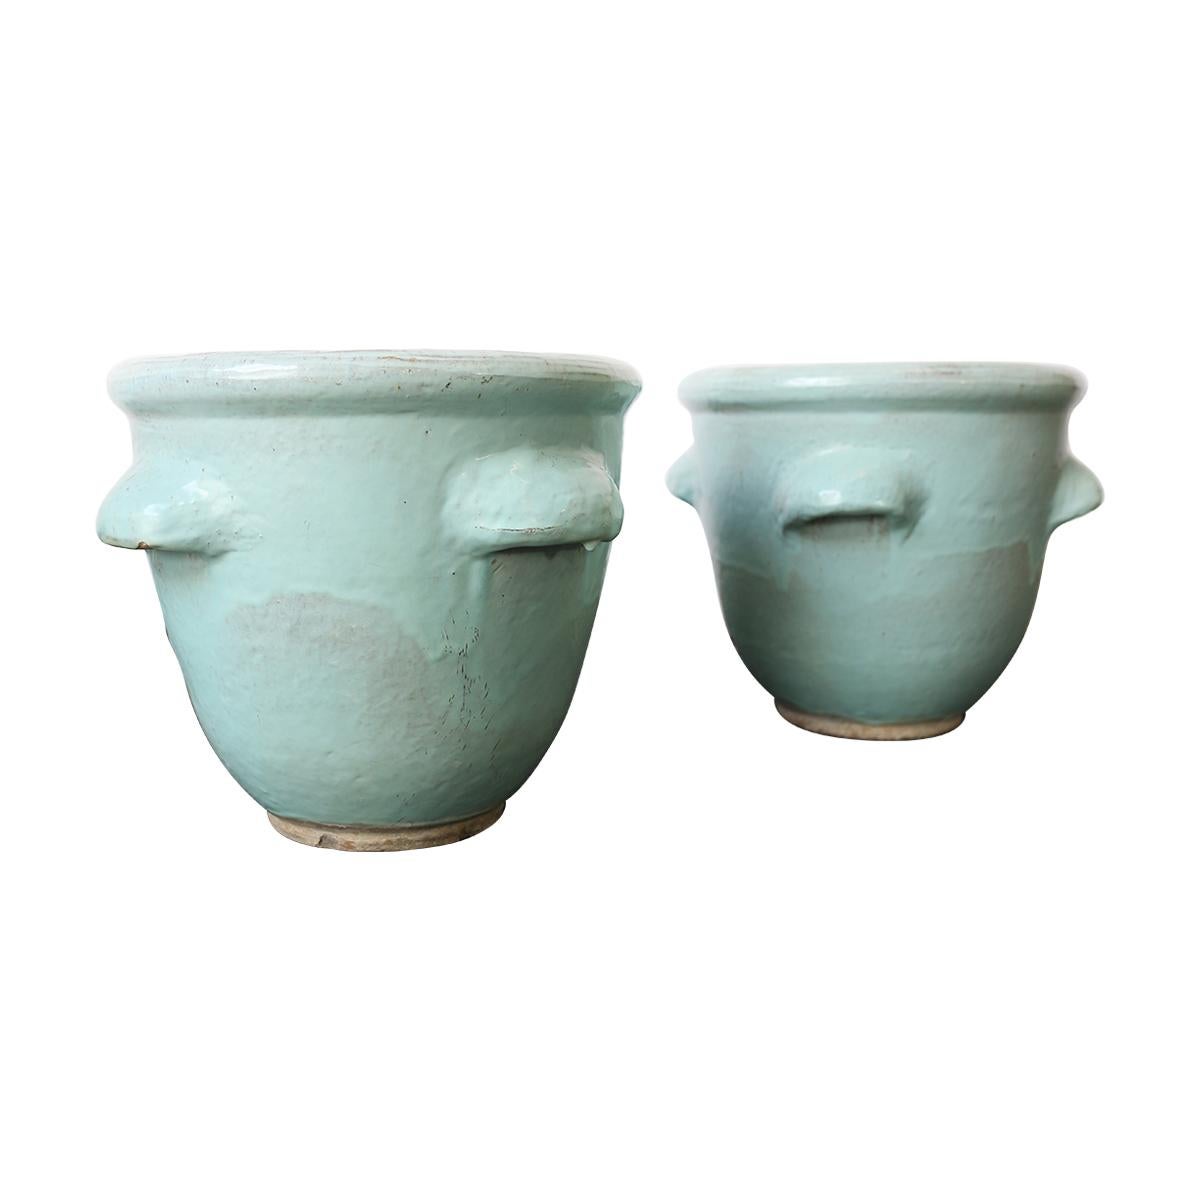 Pair of Turquoise Glazed Pottery Planters by Harding Black, 1960